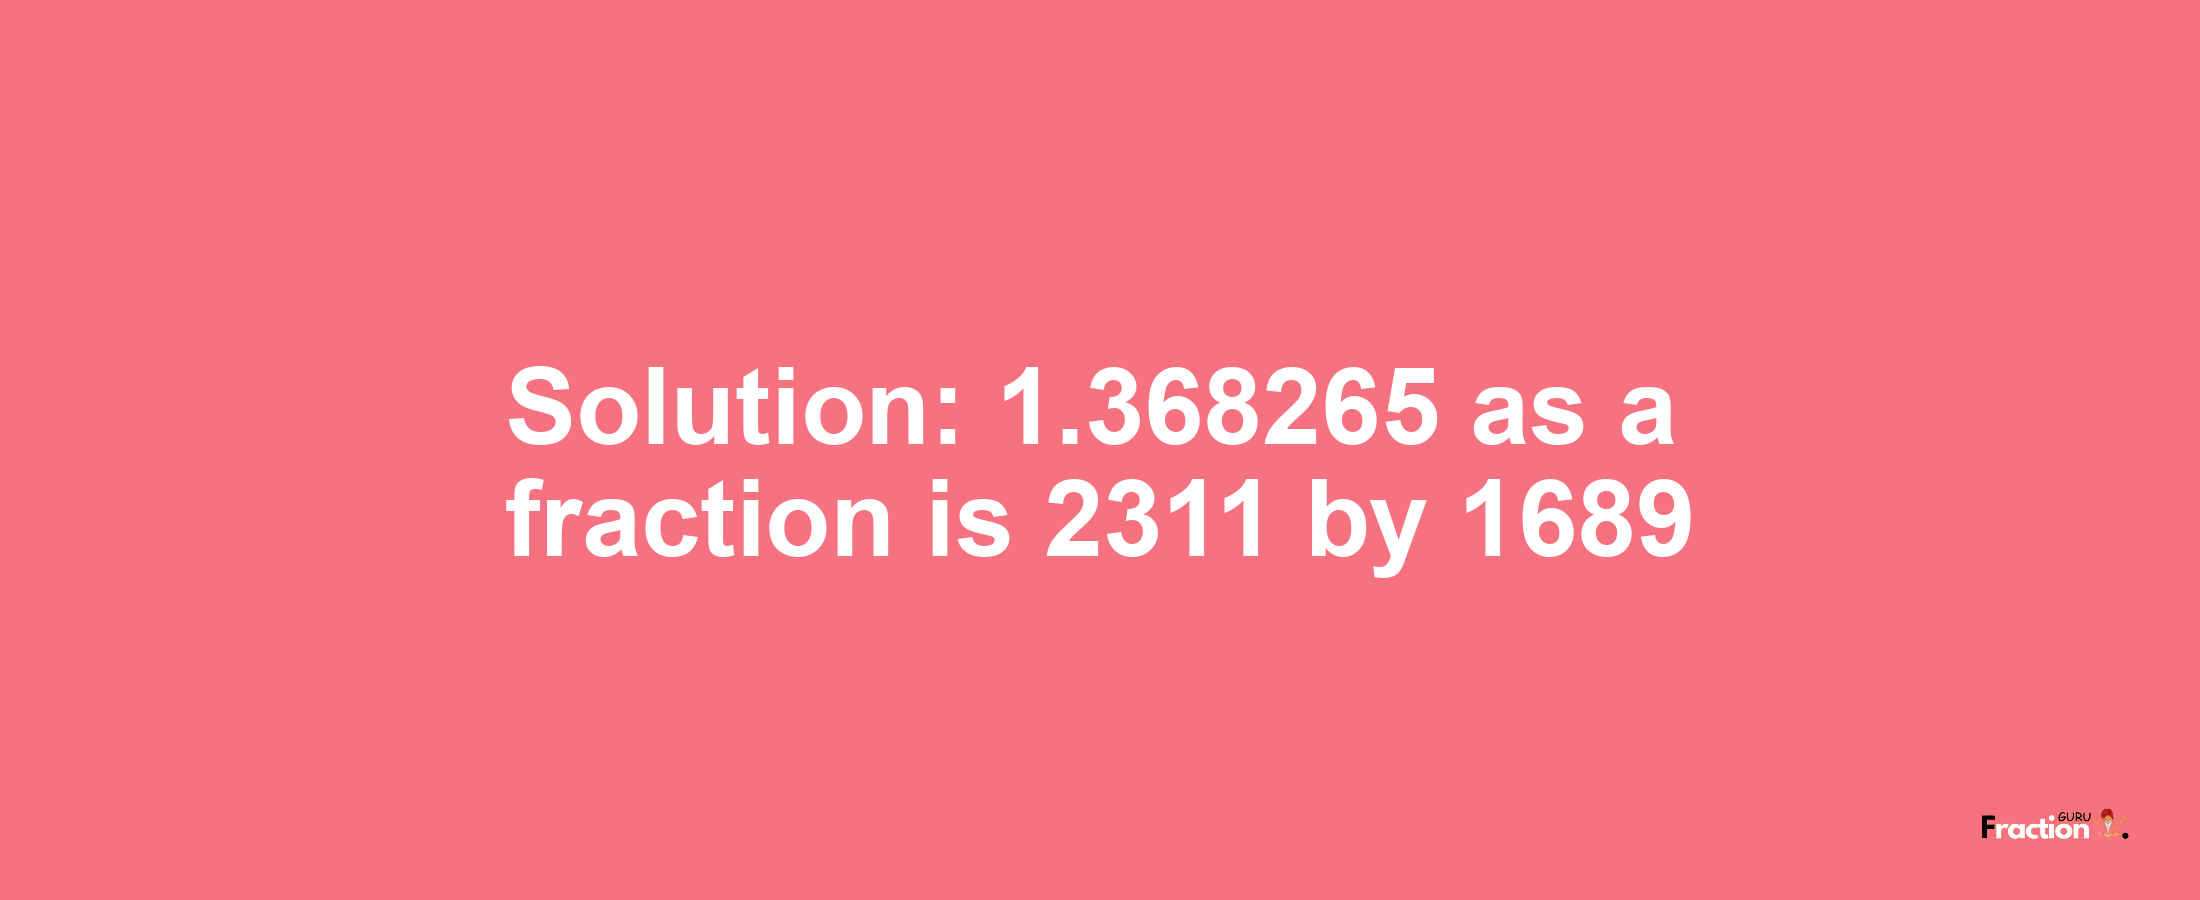 Solution:1.368265 as a fraction is 2311/1689